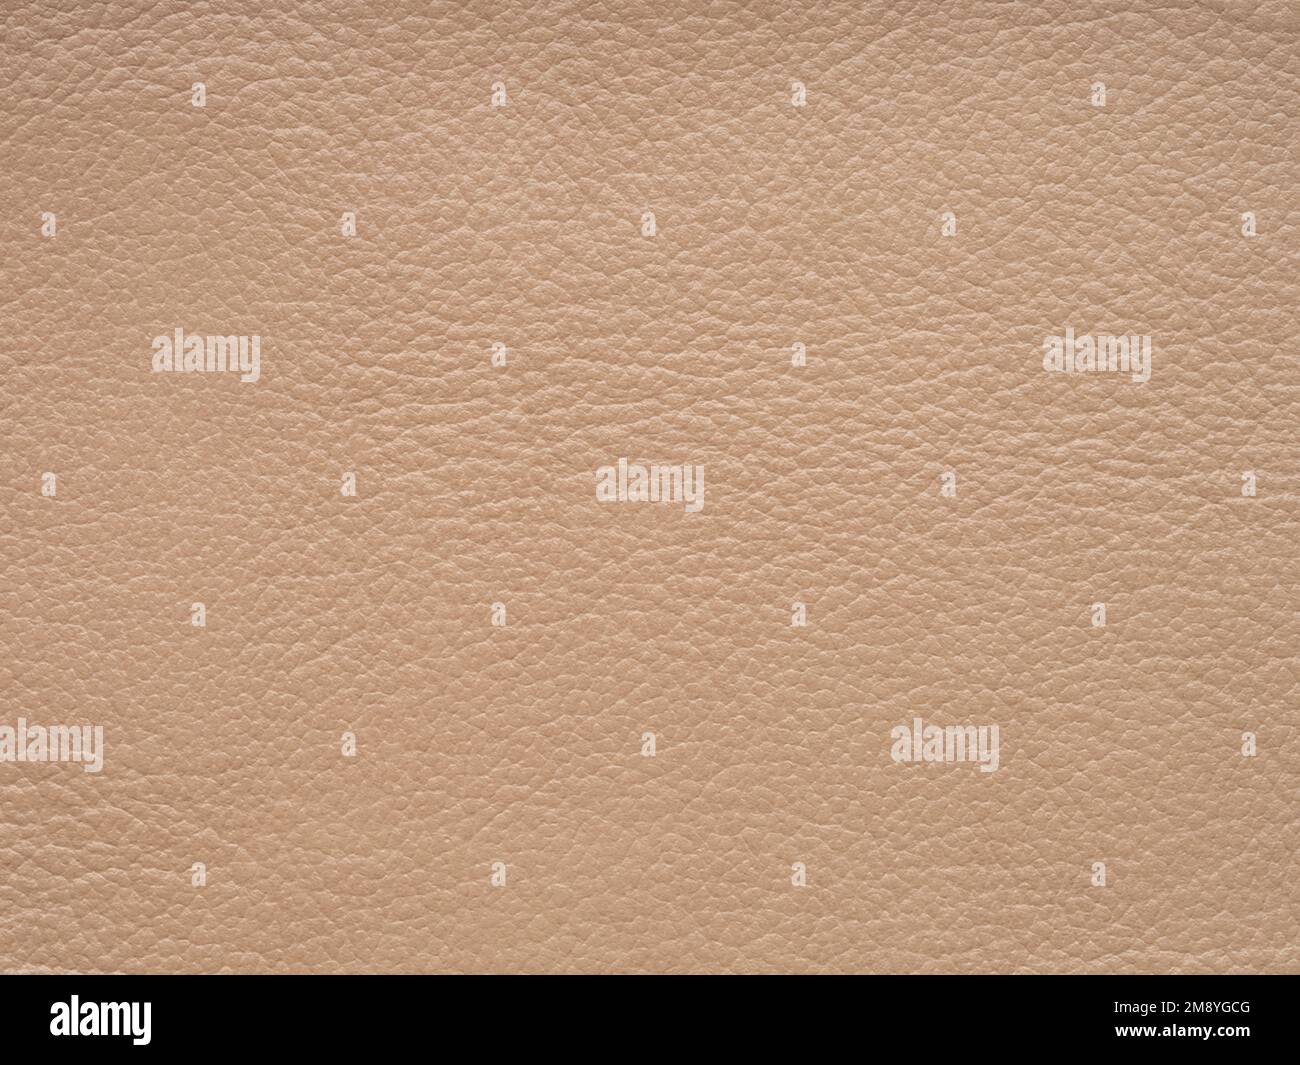 Beige or light brown color luxury genuine leather. Skin natural with design lines pattern or abstract background. Use as wallpaper or backdrop luxury Stock Photo